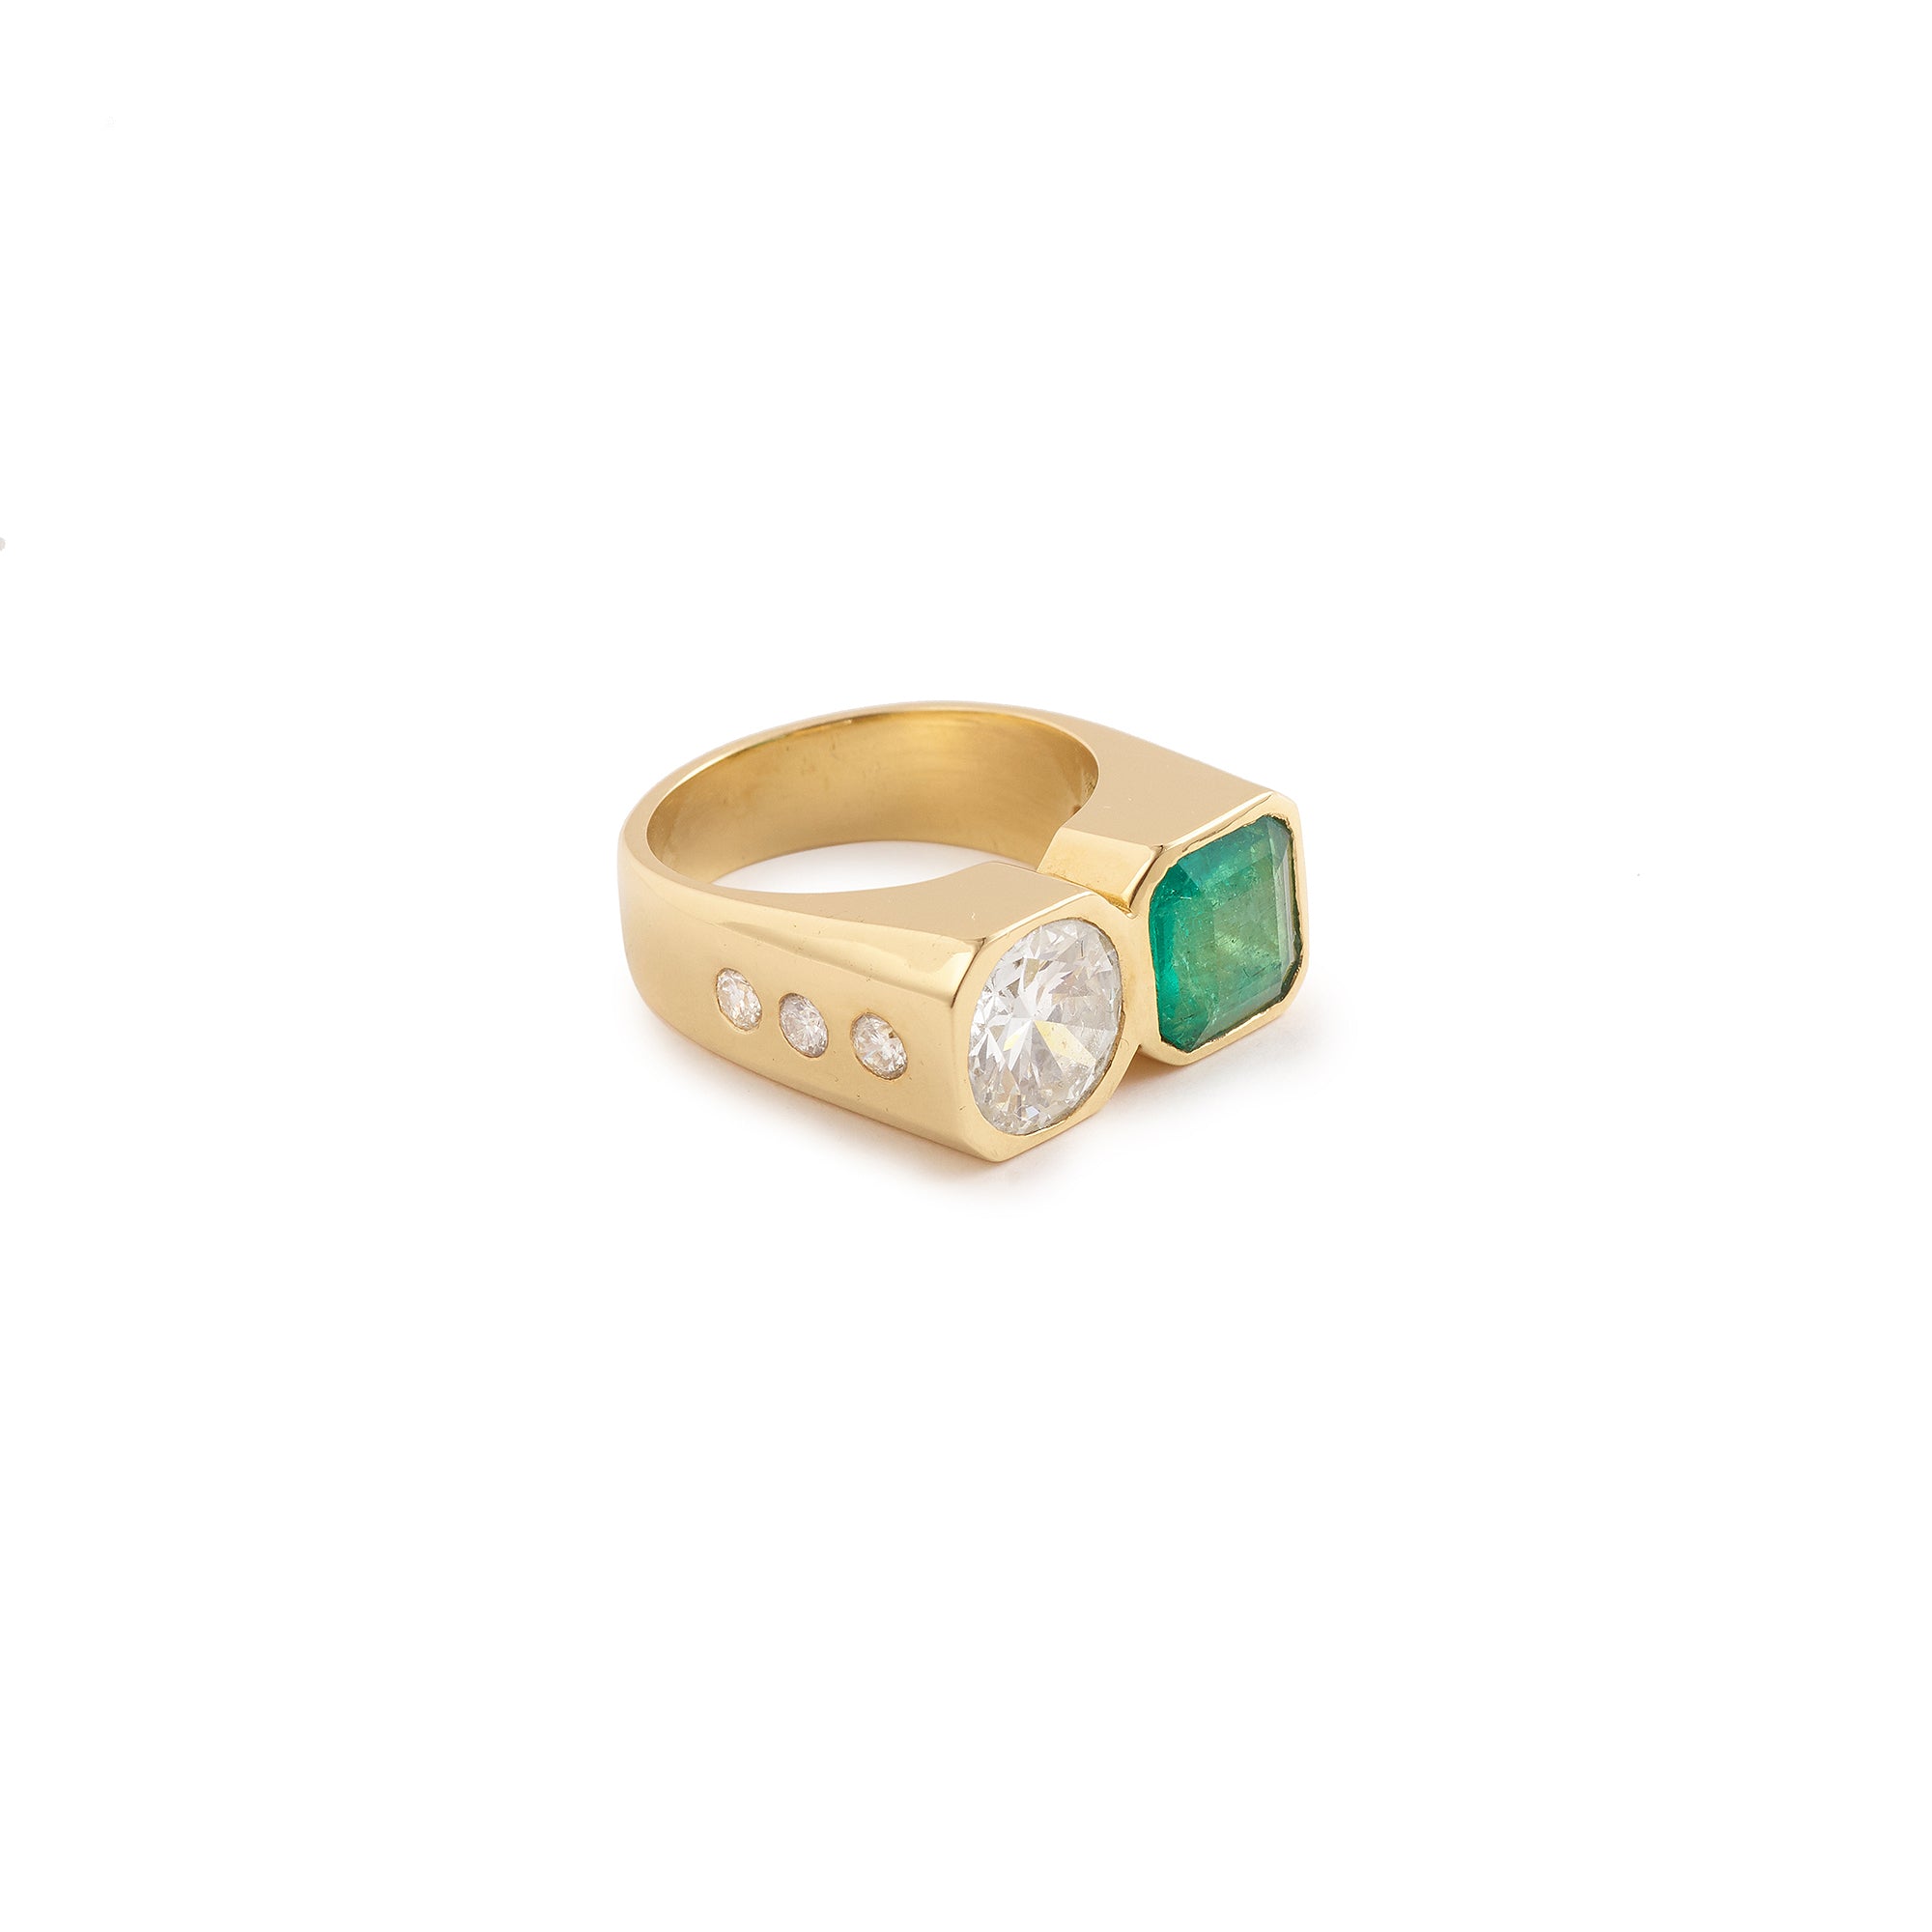 Certified 1.45 Carats Colombian Emerald & 2 Carats Diamond 18 Carats Yellow Gold Ring